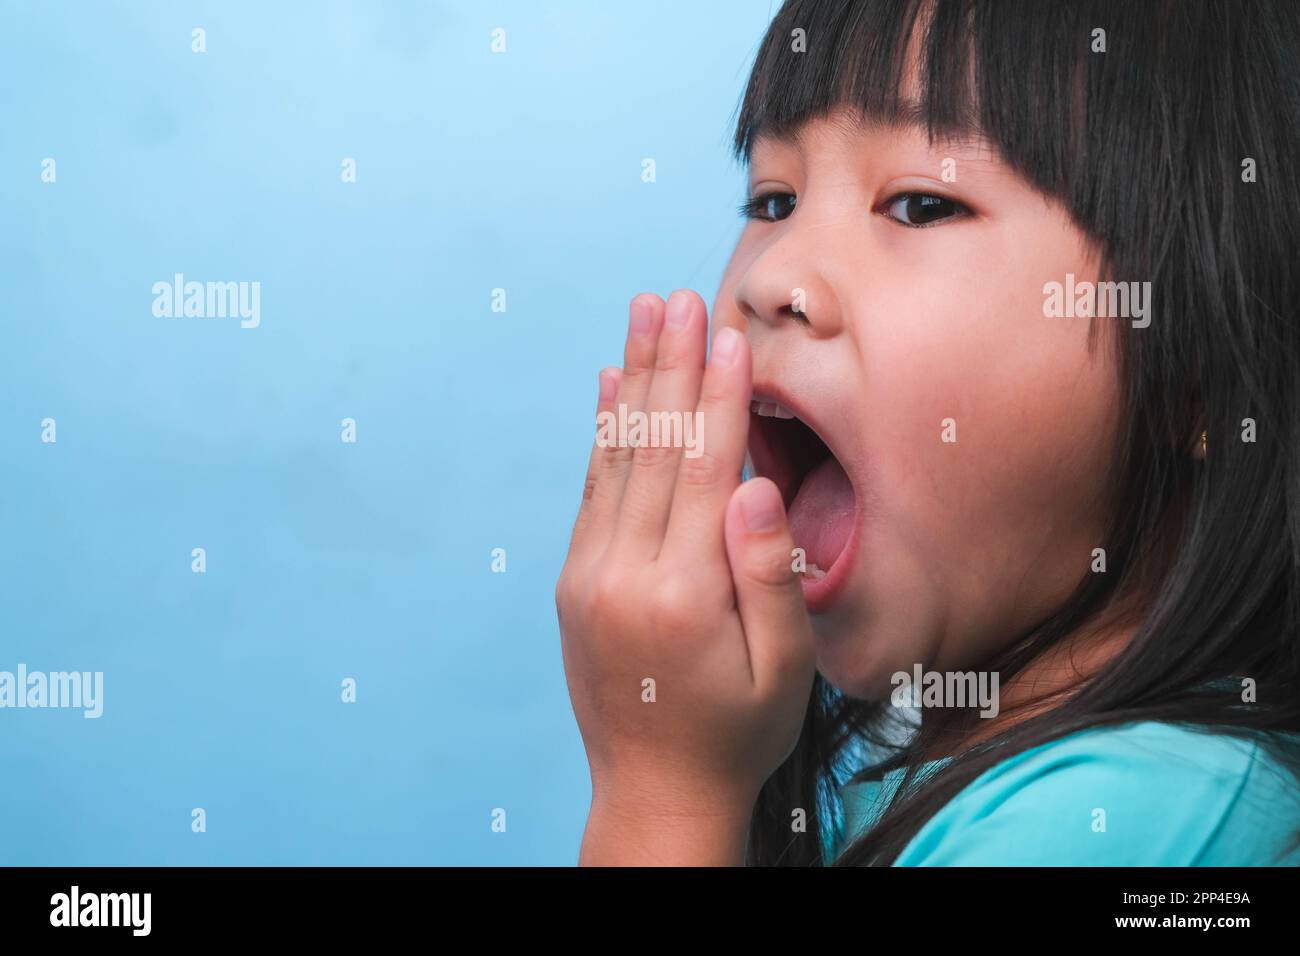 Little asian girl covering her mouth to smell the bad breath. Child girl checking breath with her hands. Oral health problems or dental care concept. Stock Photo